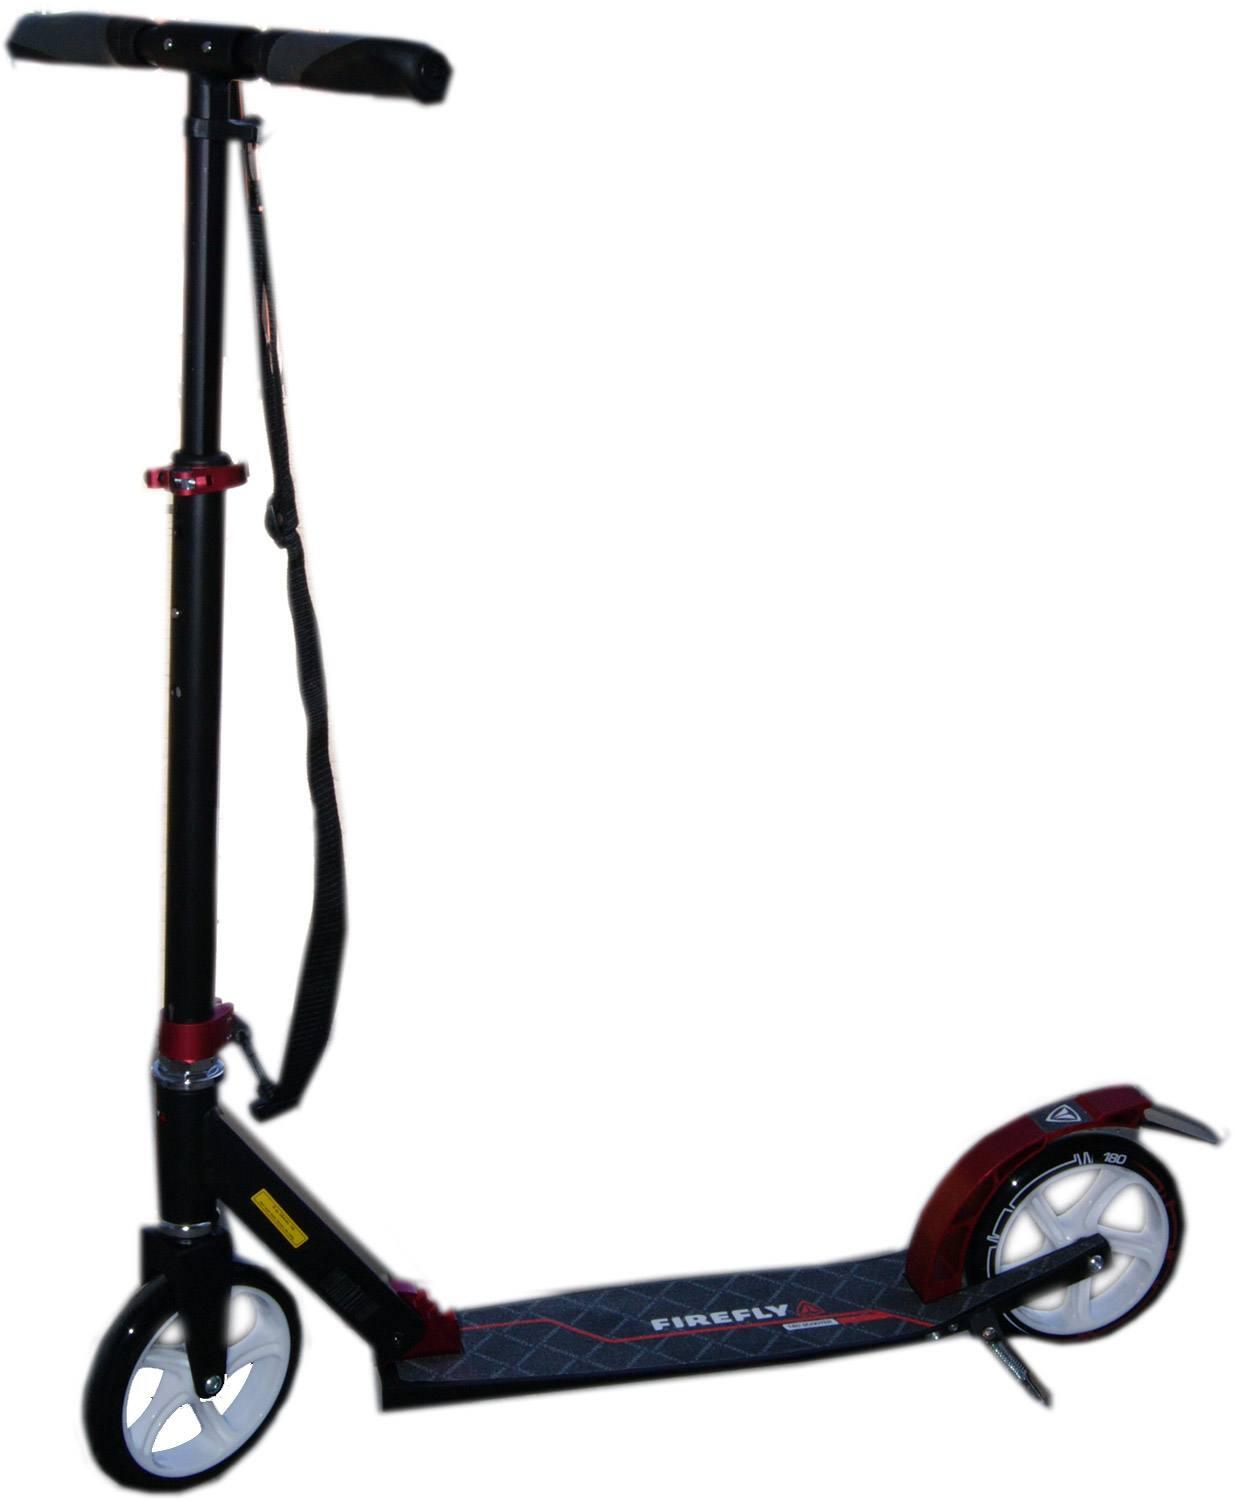 Firefly Scooter Sold 180 (Farbe: 900 schwarz/rot)